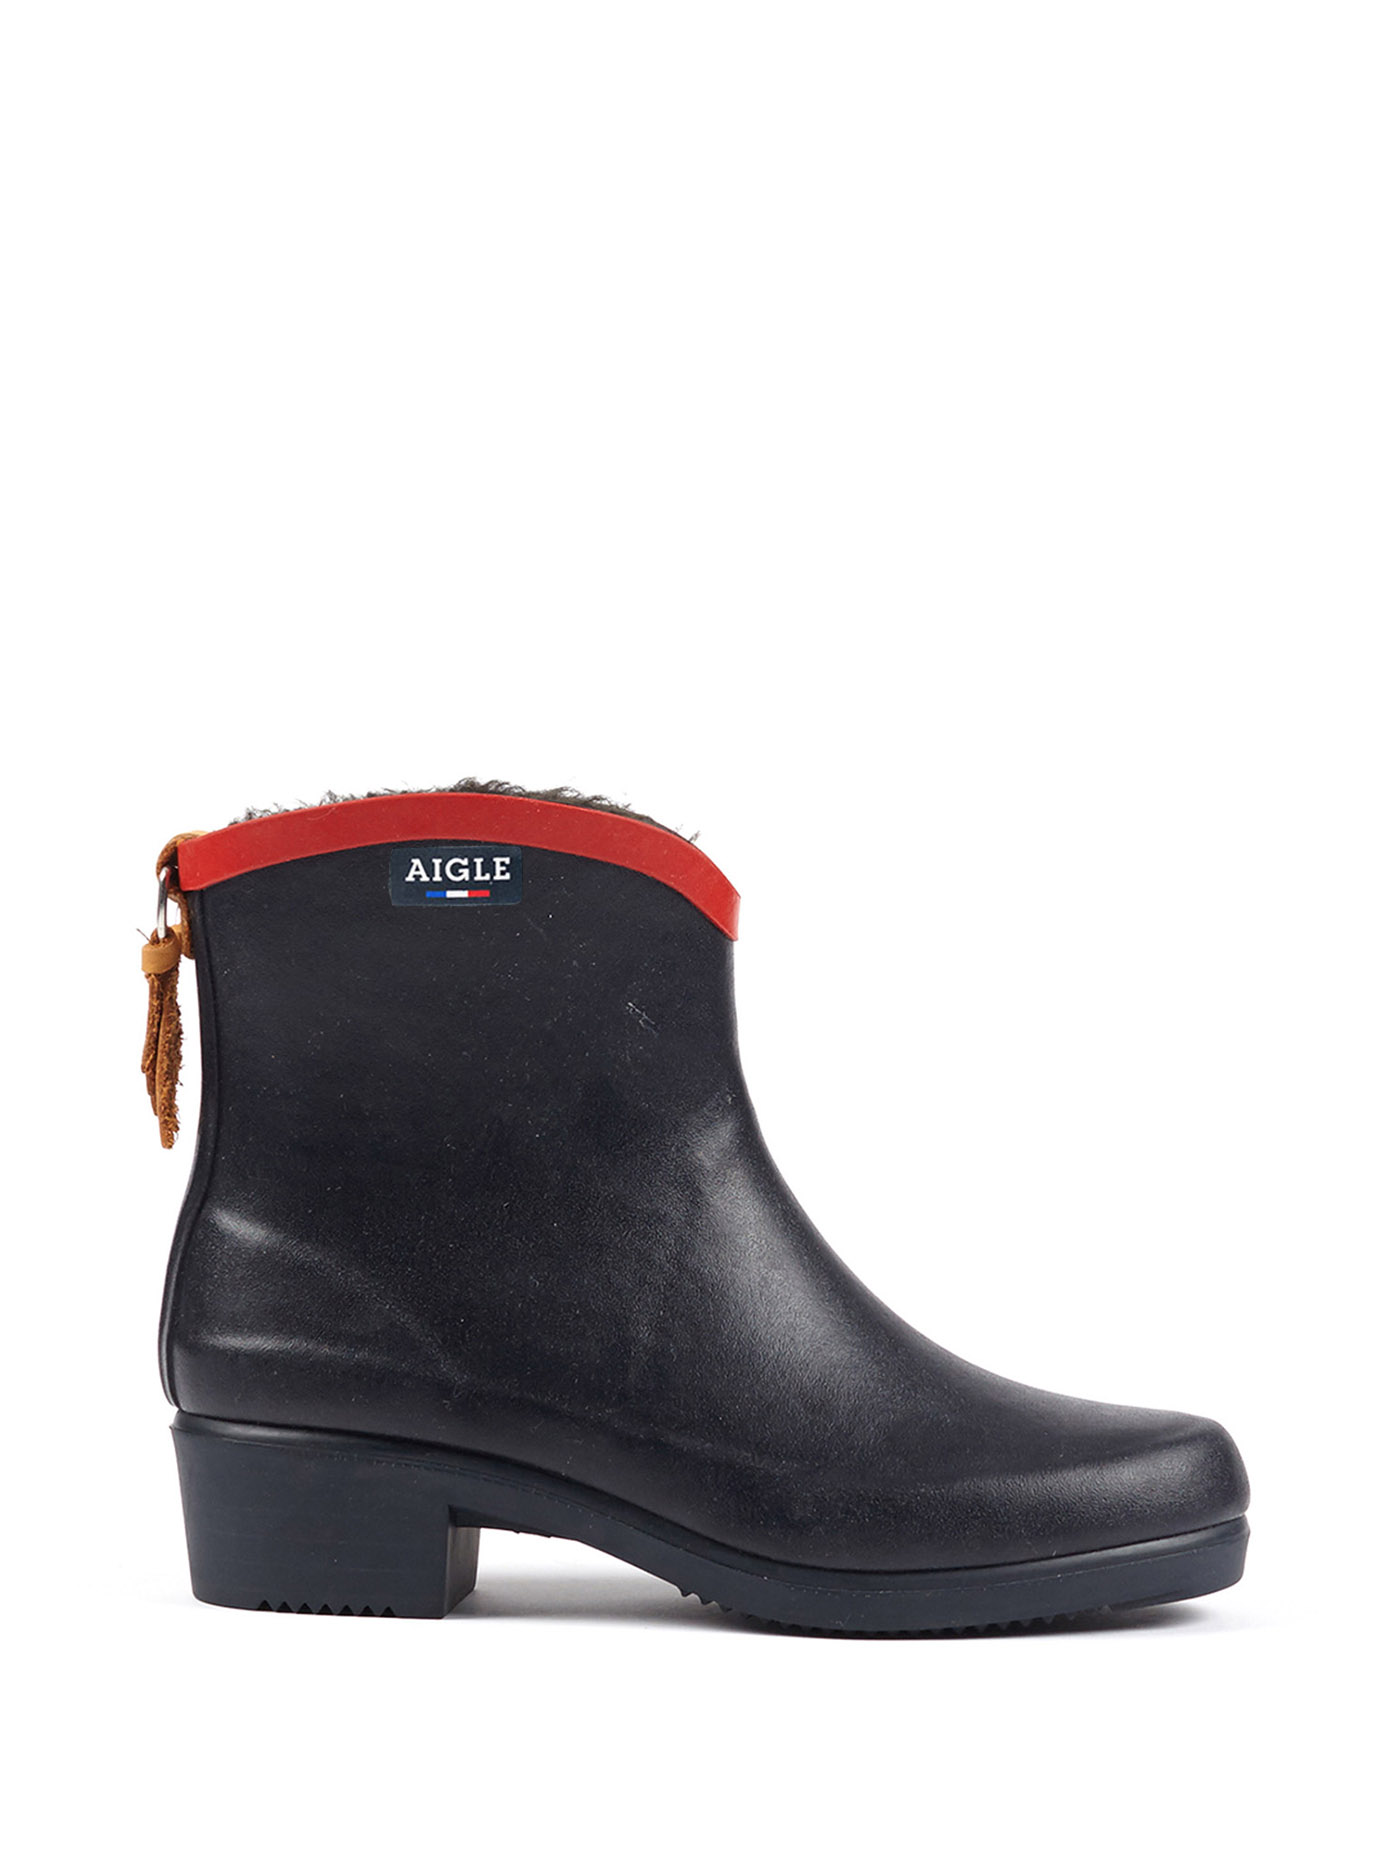 aigle fur lined boots